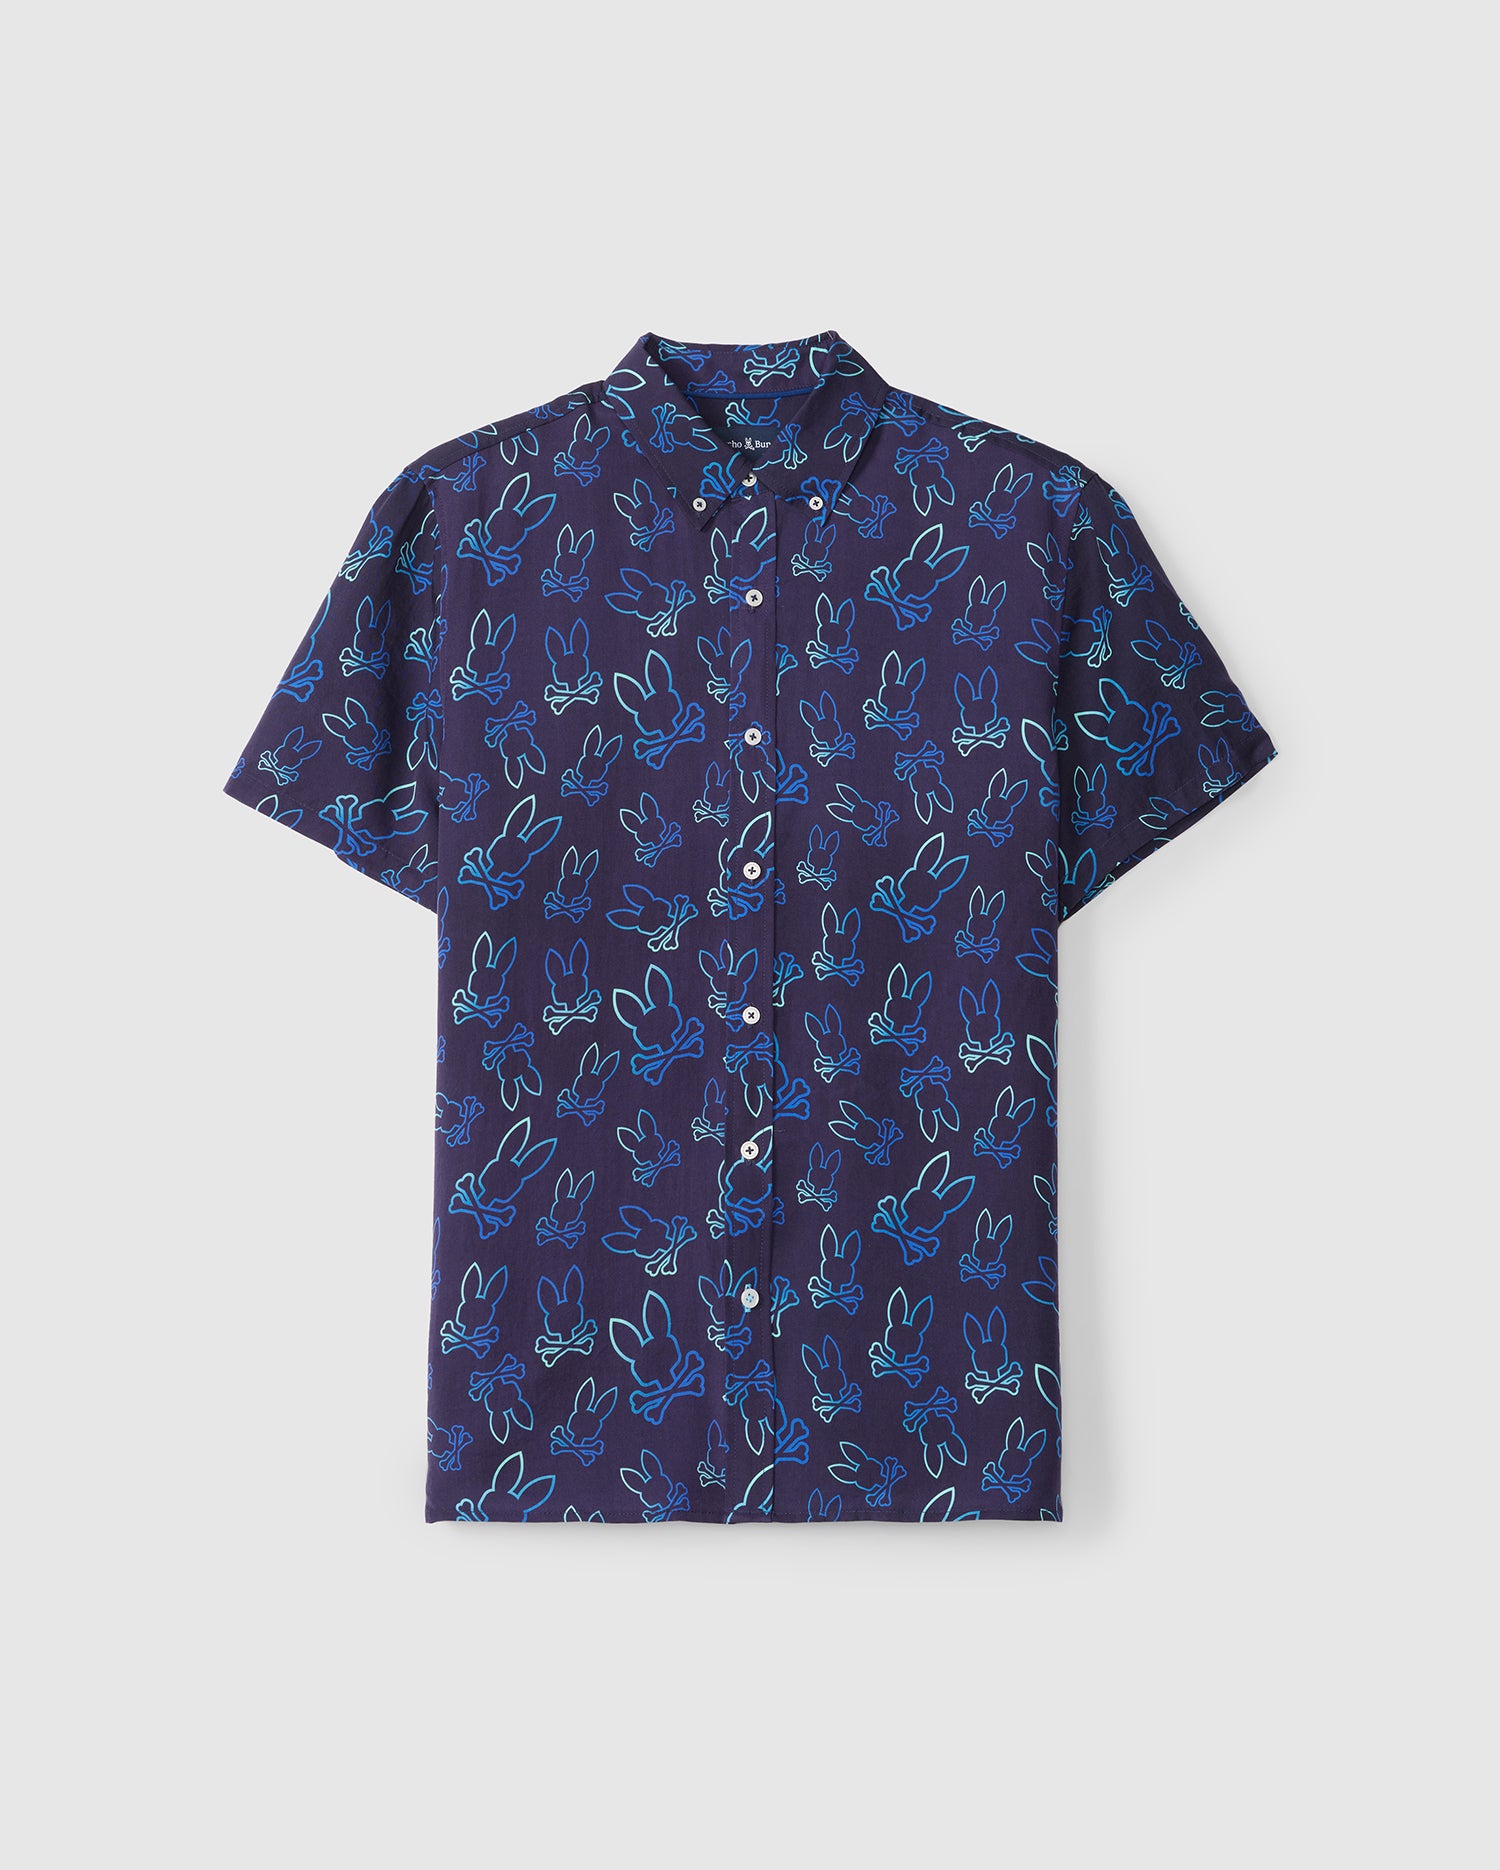 A short-sleeved, button-up shirt with a navy blue base color. The MENS SHELDON ALL OVER PRINT SHIRT - B6Q574C200 by Psycho Bunny features a repeating pattern of light blue and turquoise line drawings of hands making the peace sign. The classic collar and casual fit make this Pima cotton shirt perfect for relaxed occasions.